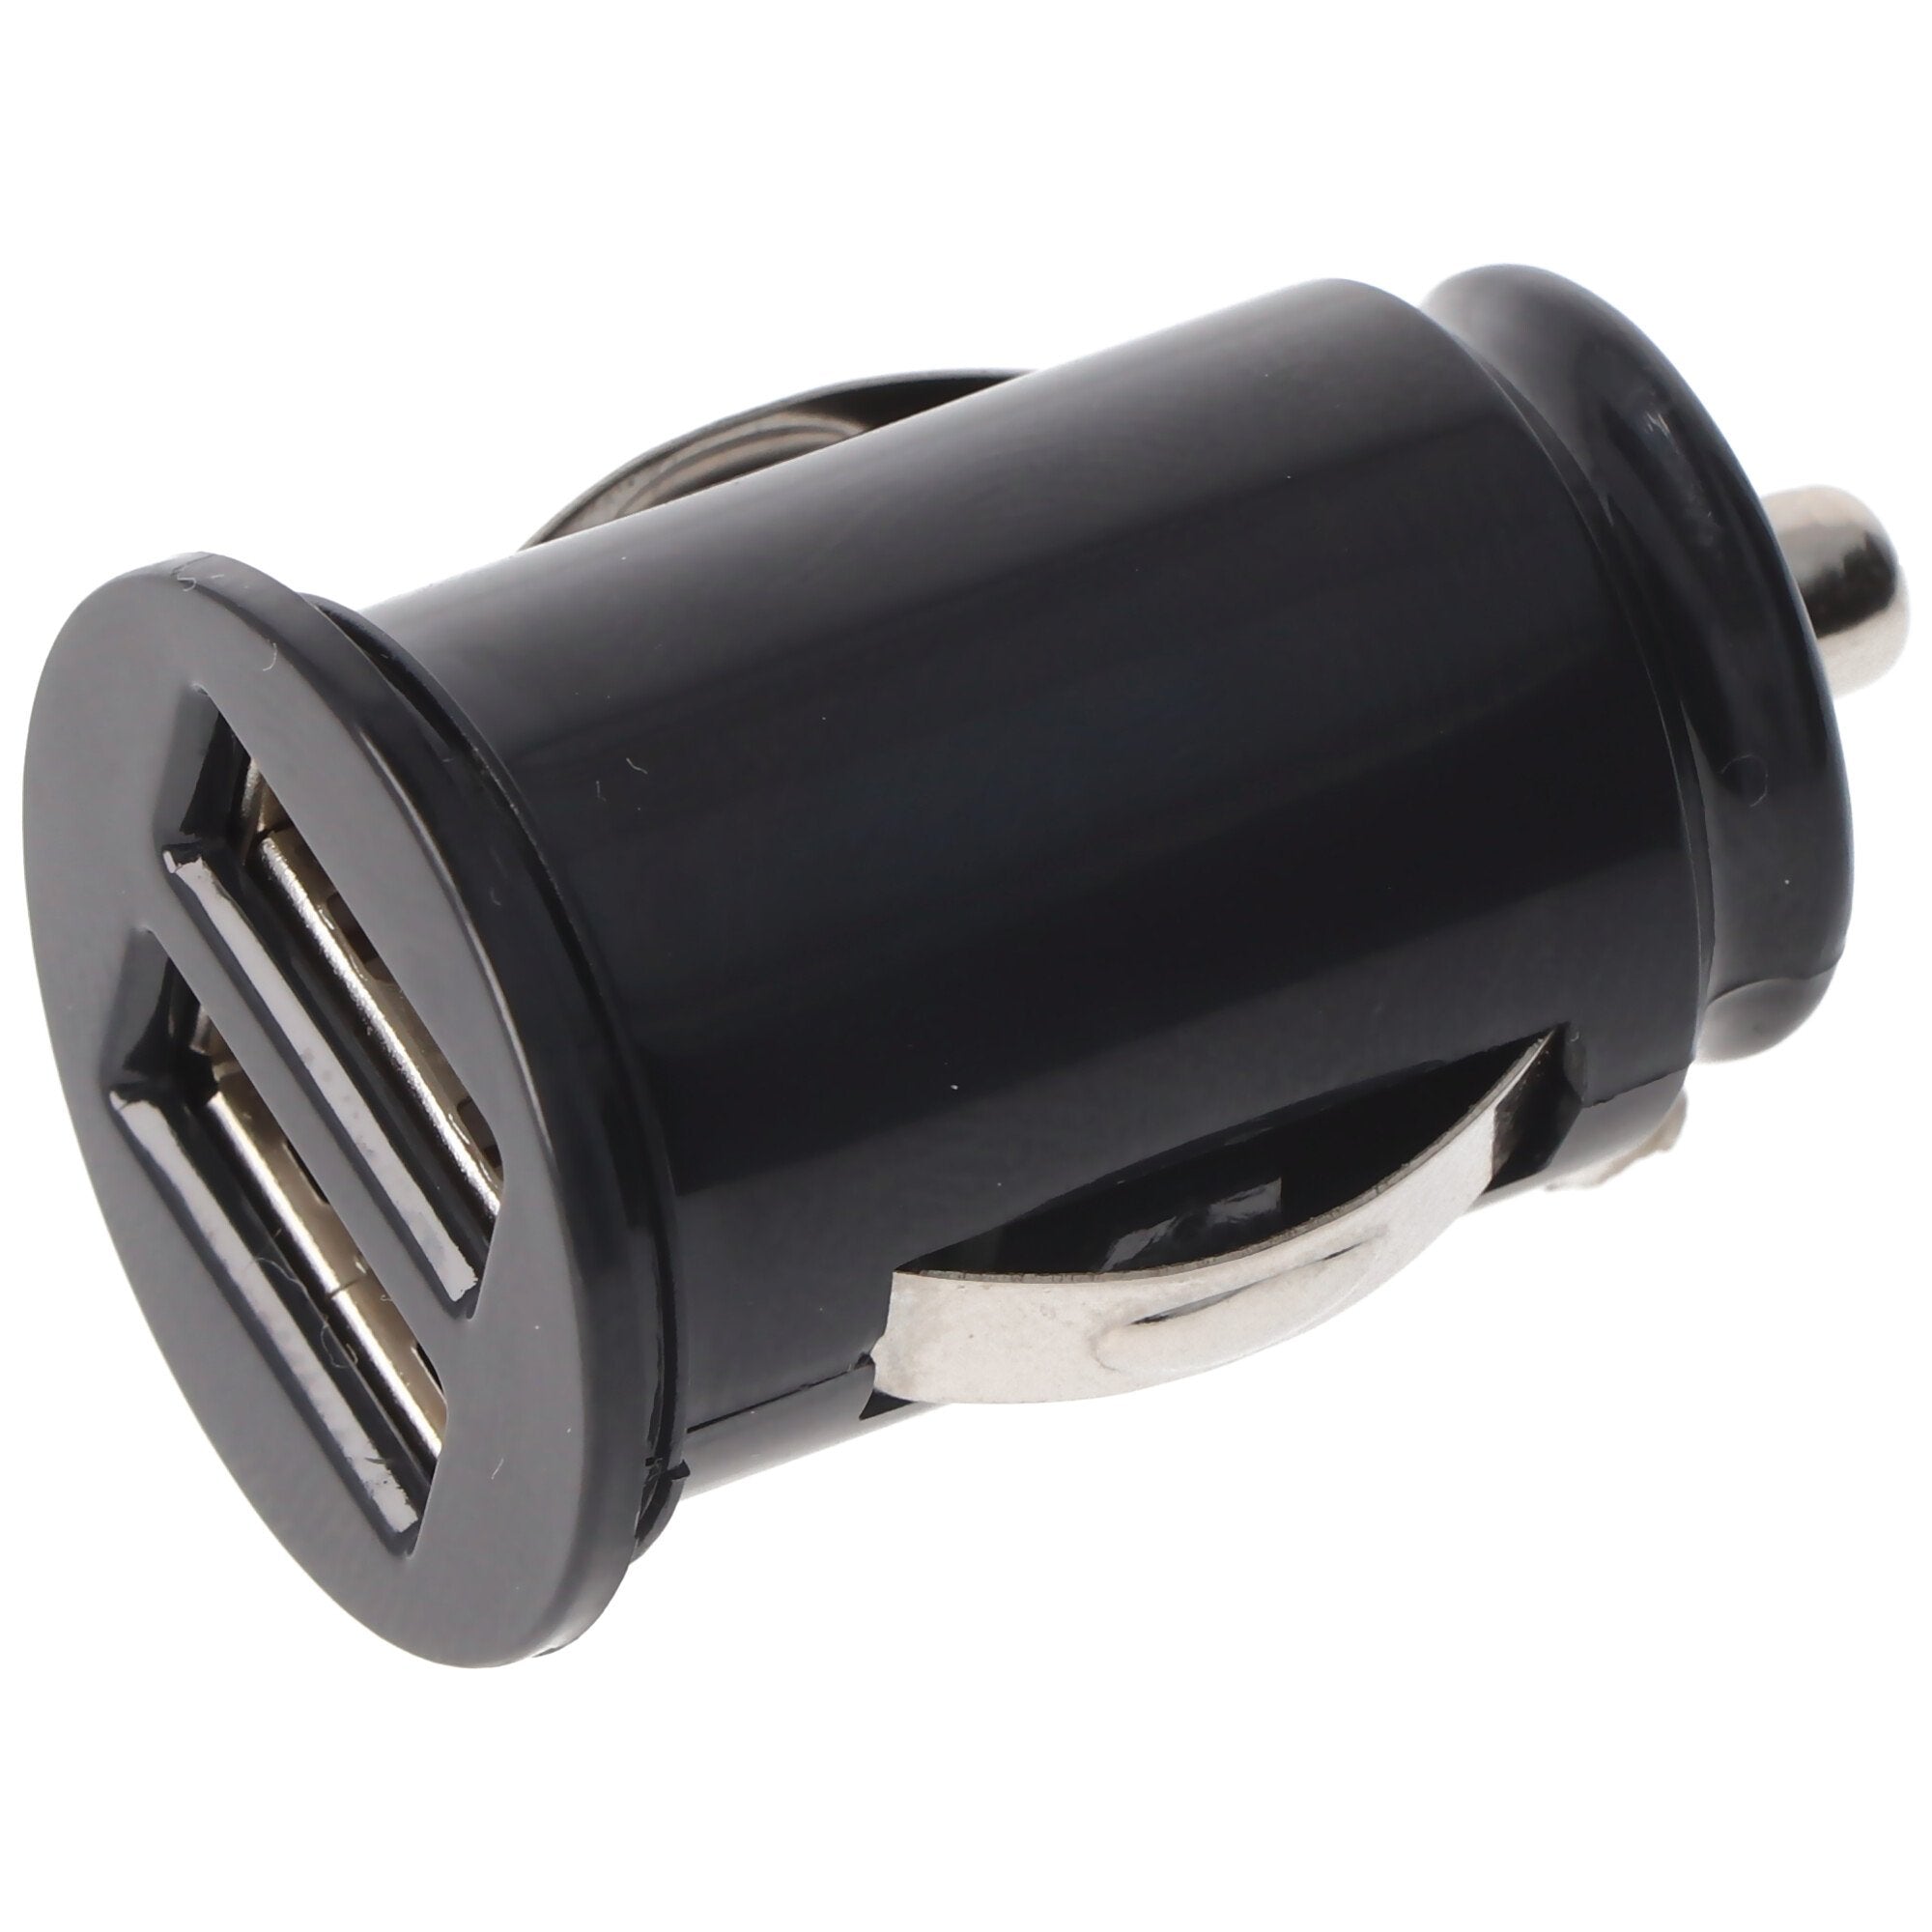 AccuCell car charger adapter USB - Dual USB - 2.1A - black - TINY